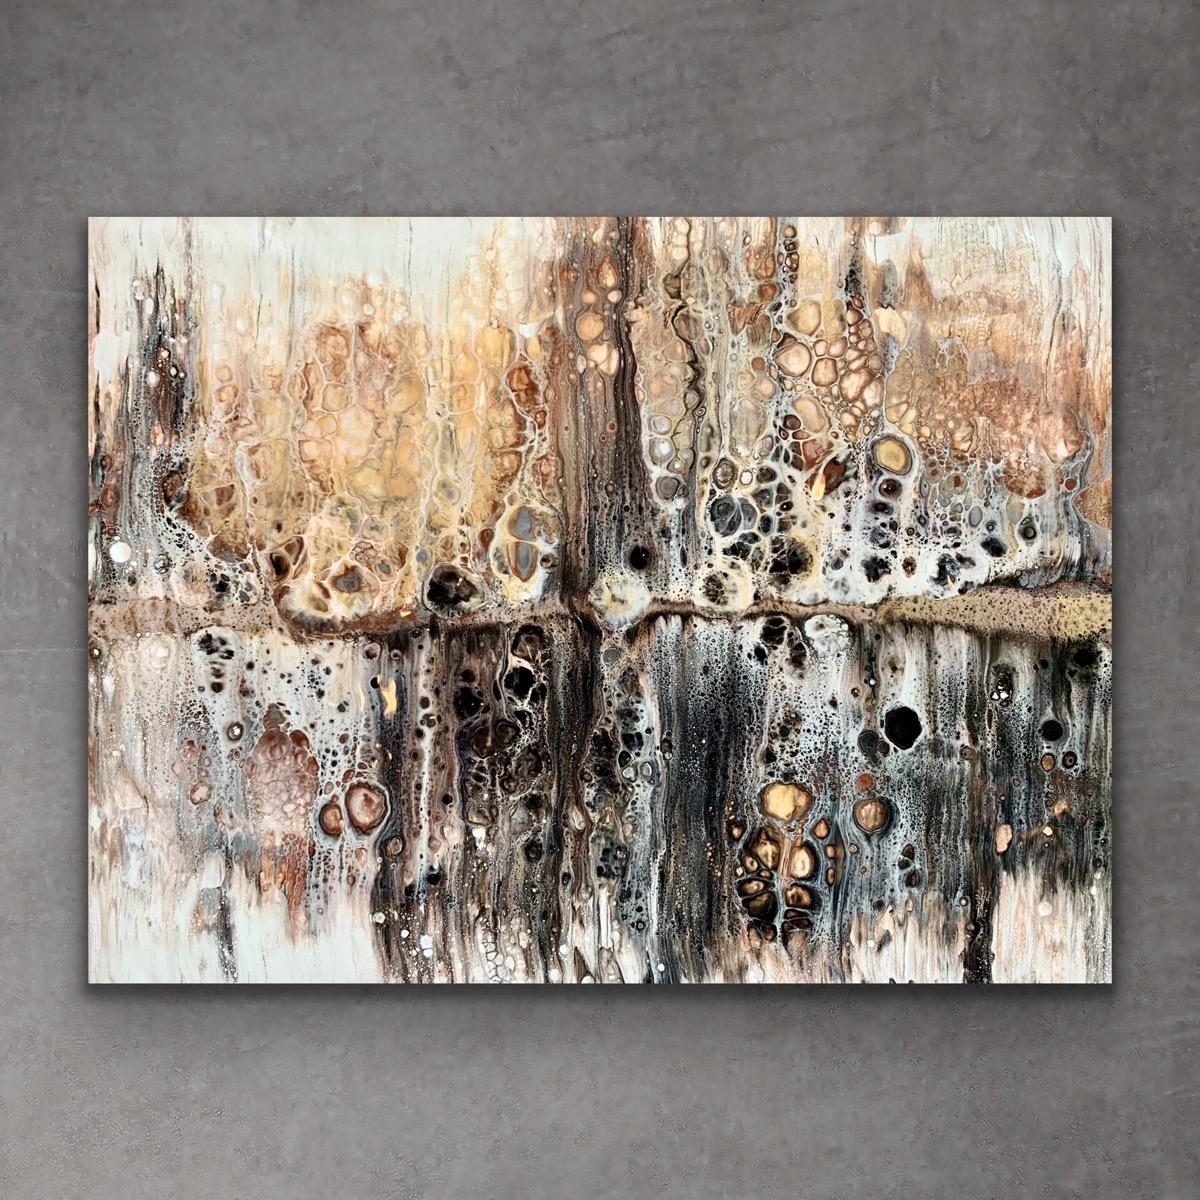 Large Contemporary Abstract Painting, Modern Giclee Print For Sale 6